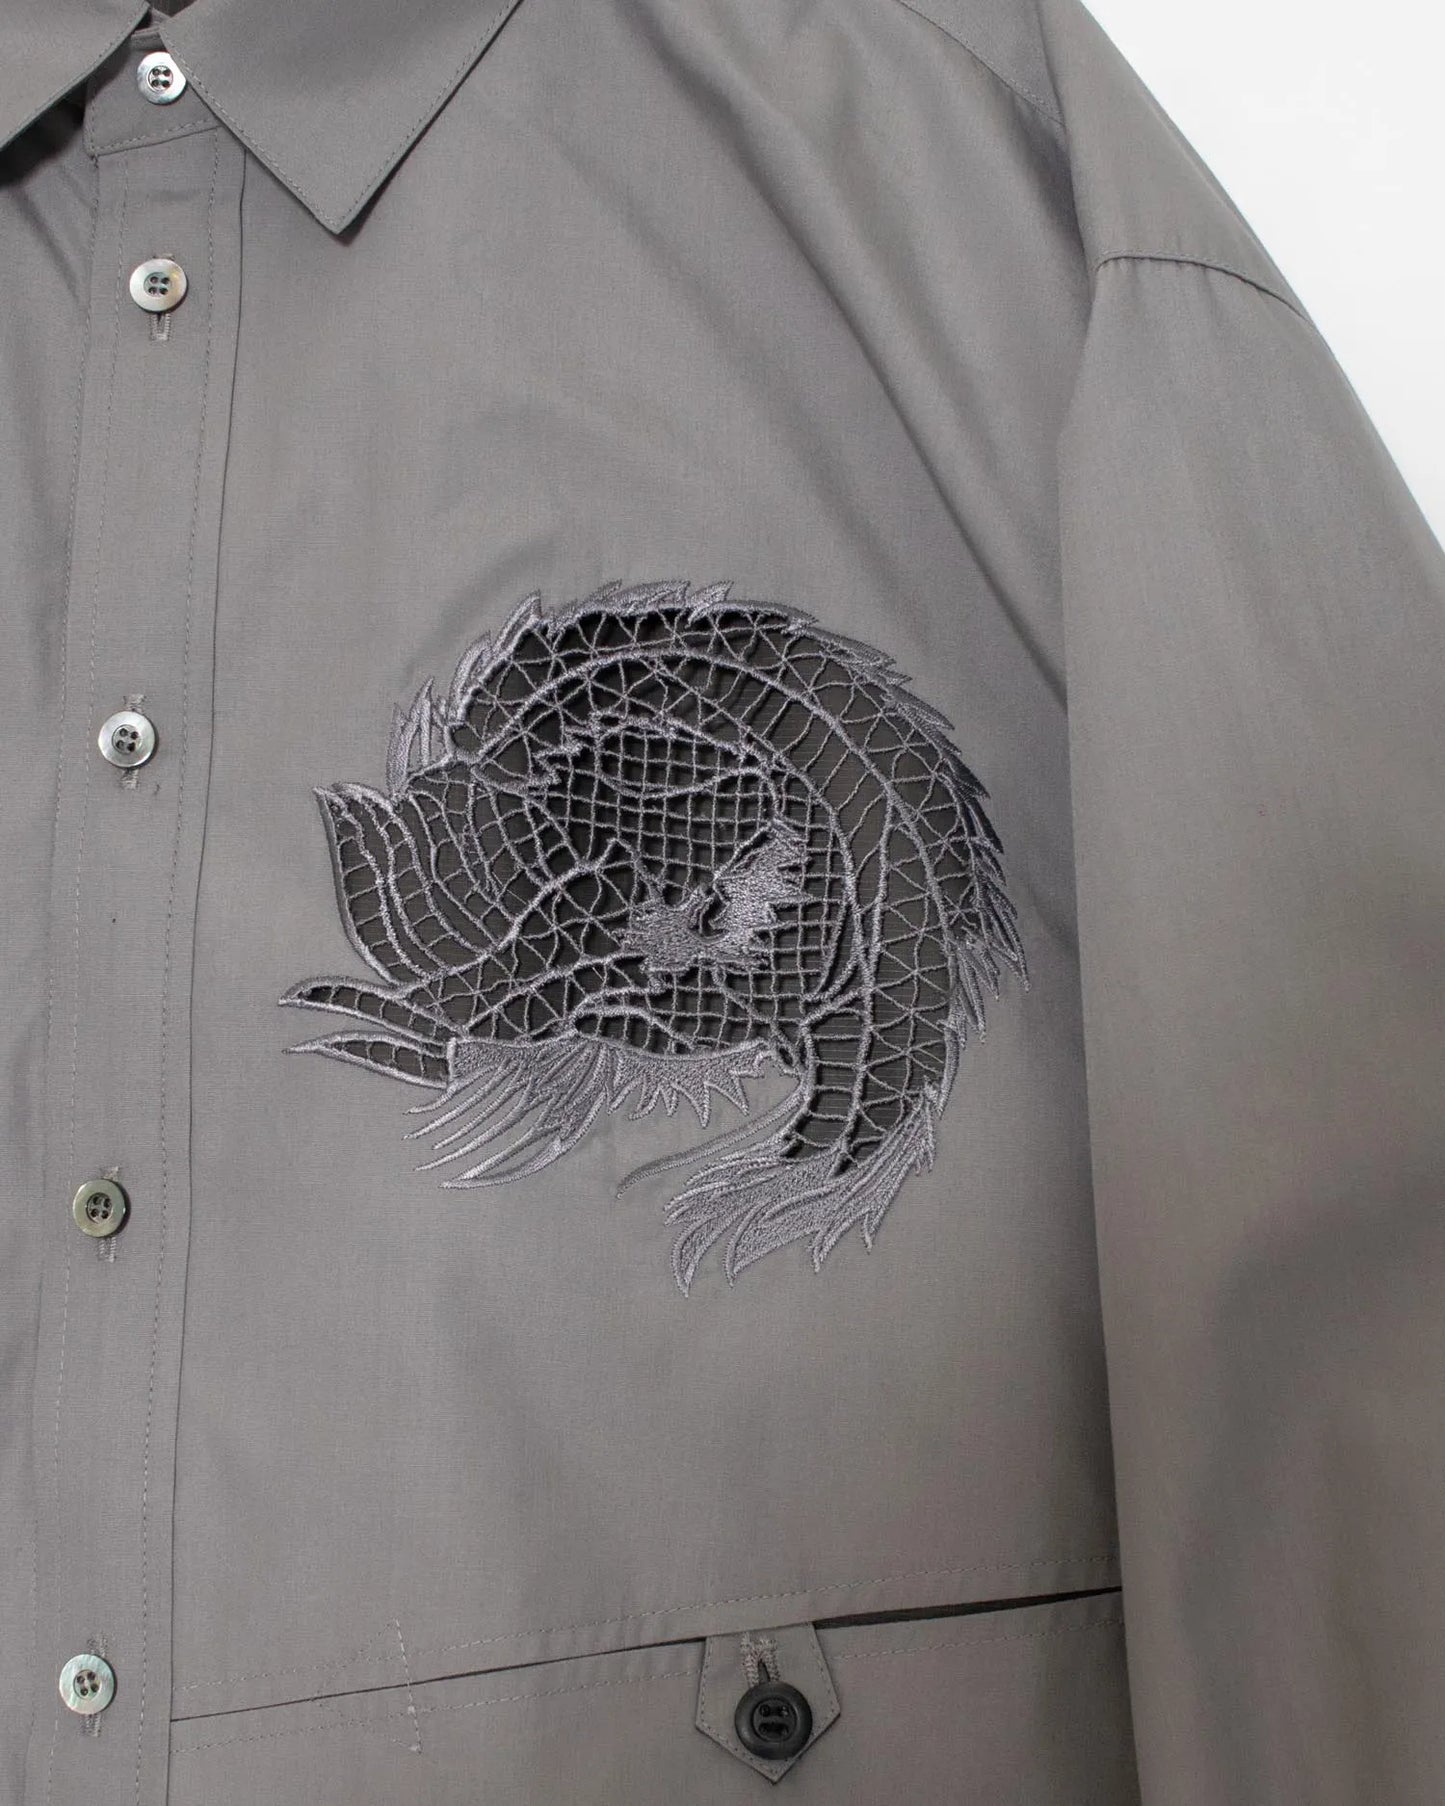 EMBROIDERY SHIRT GREY